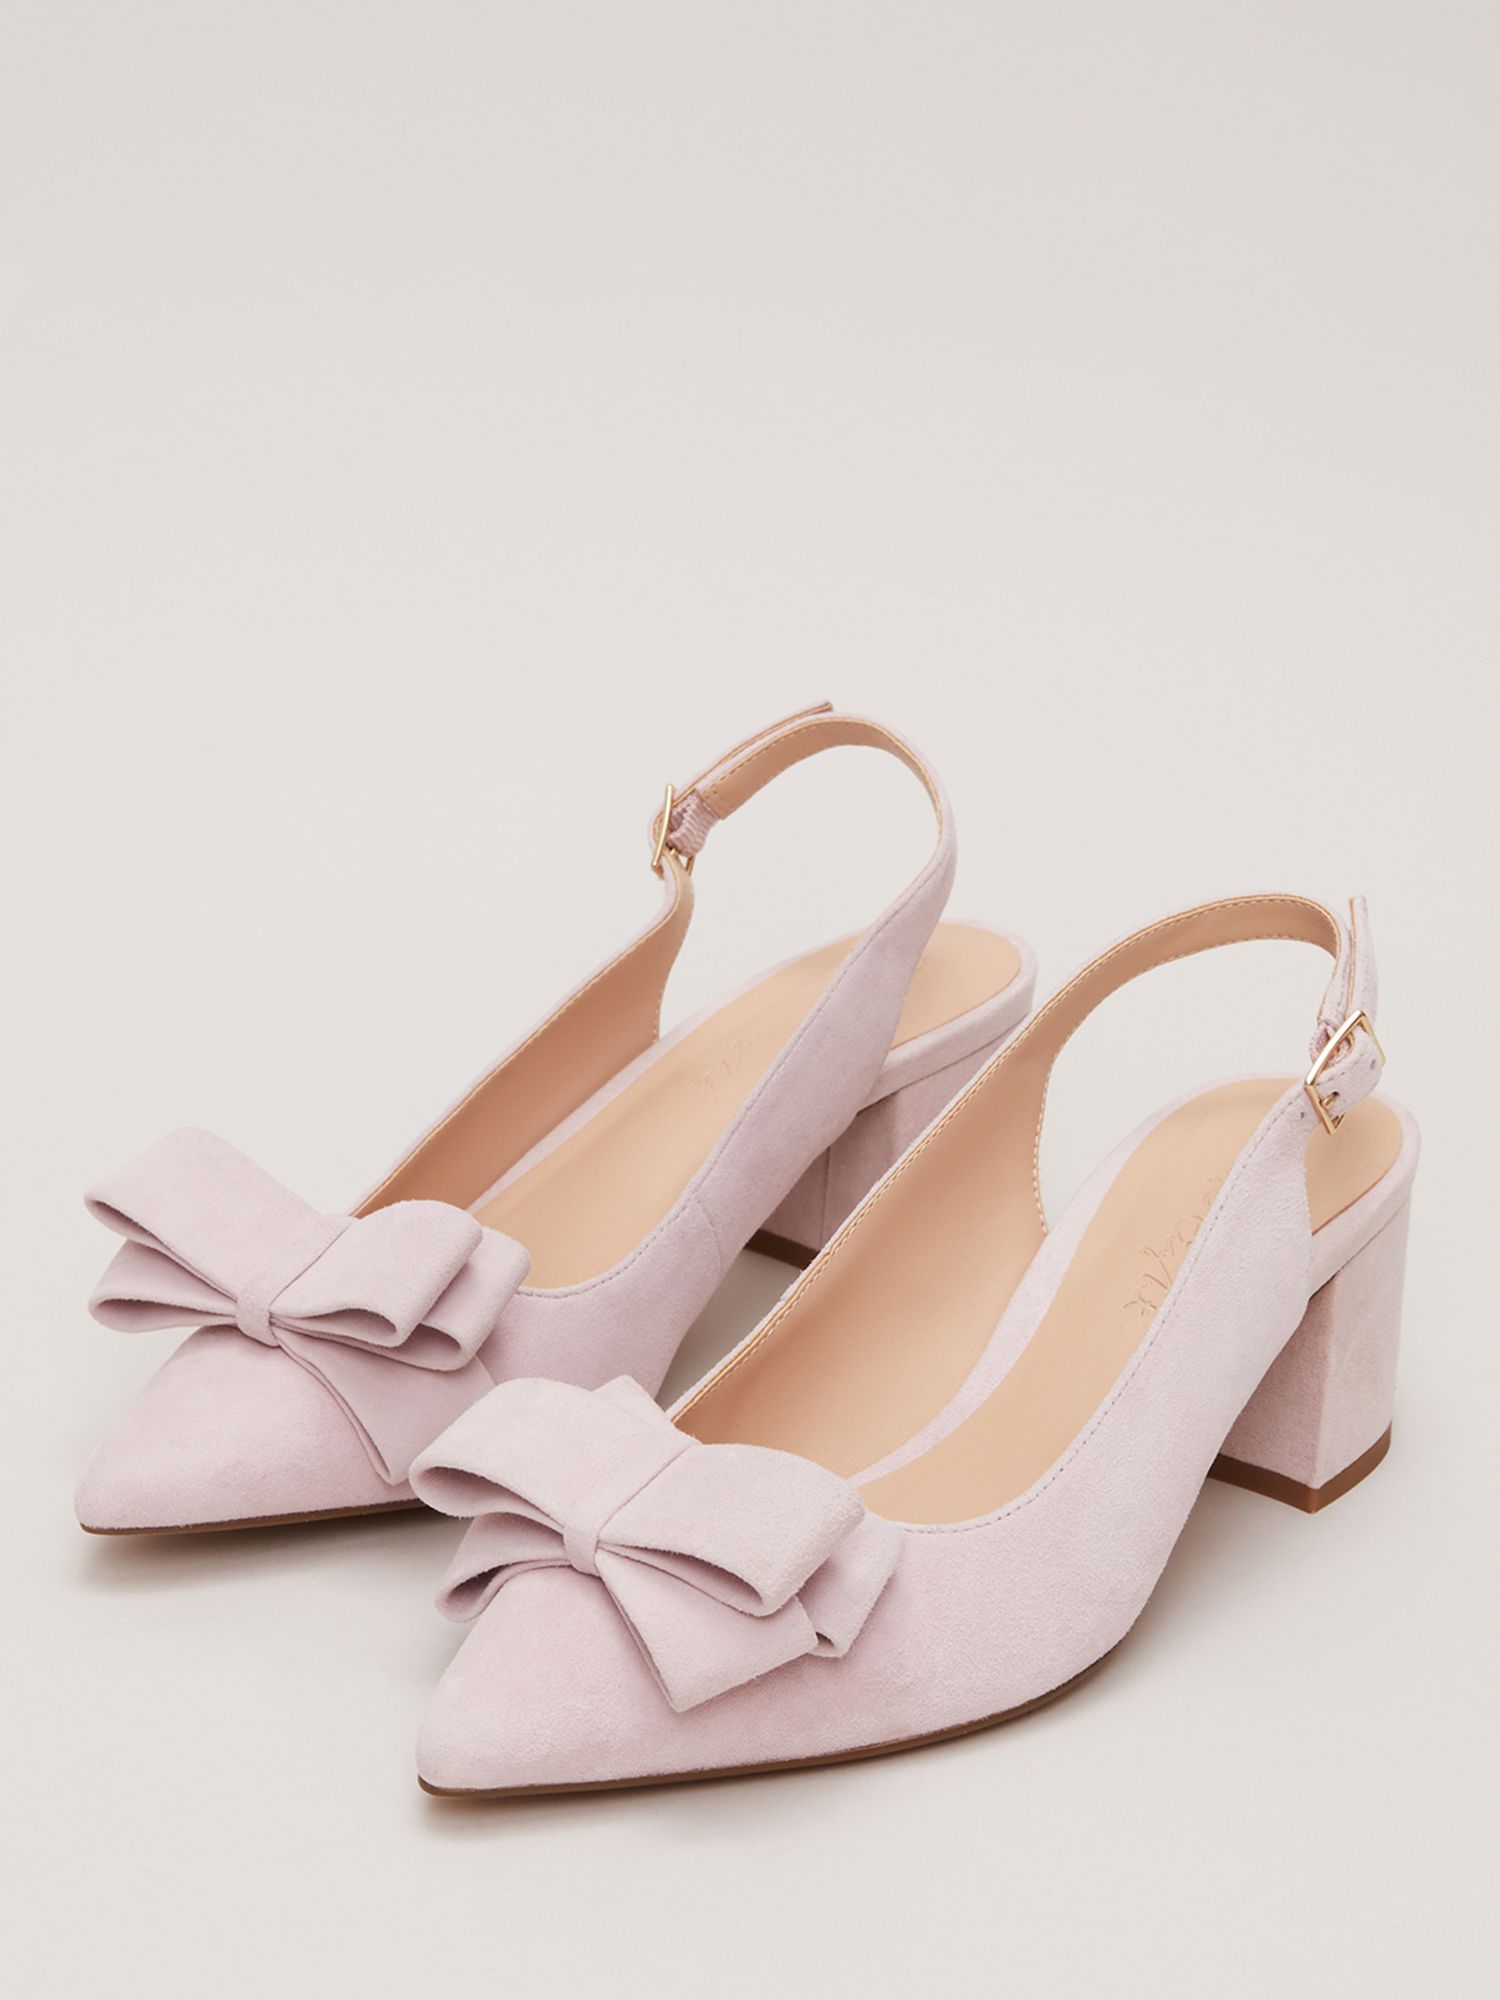 Phase Eight Suede Bow Detail Slingback Court Shoes, Pale Pink, EU40